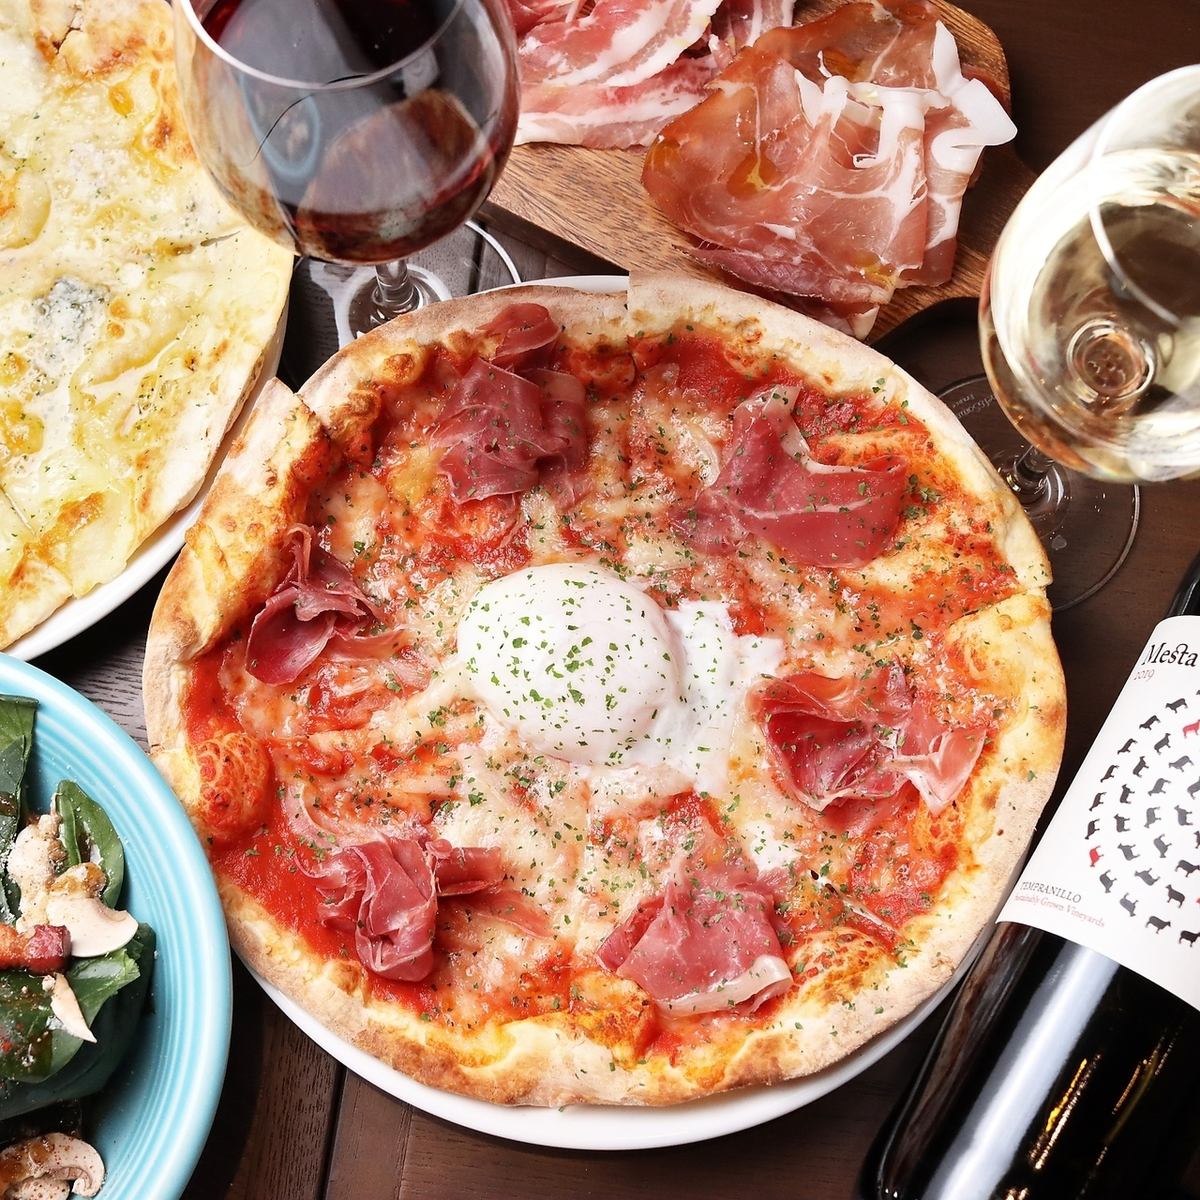 Enjoy authentic Italian cuisine in a stylish space♪ All food and drinks are 550 yen◎